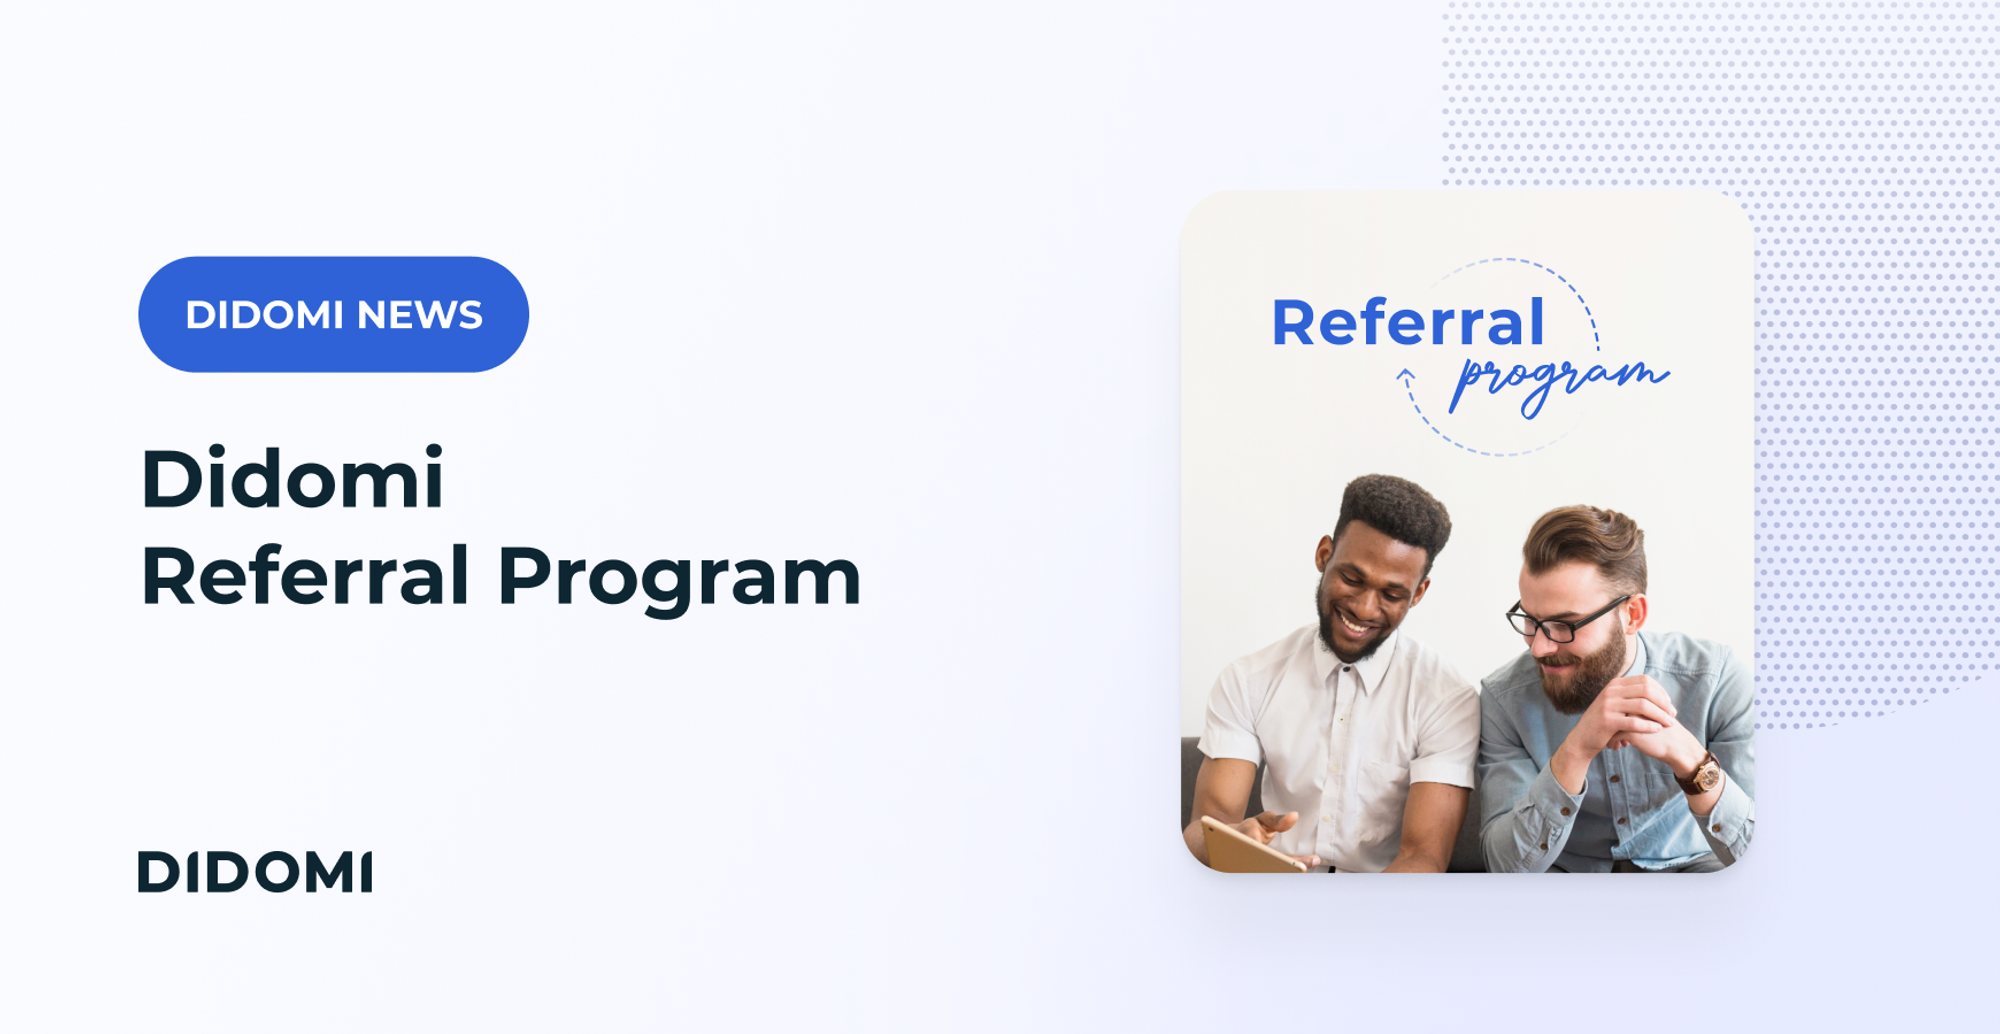 The title "Didomi referral program" is highlighted by a label "Didomi News" The image also features a photography of two men dressed in business casual attires, looking over a tablet cheerfully, with the words "Referral program" drawn above them